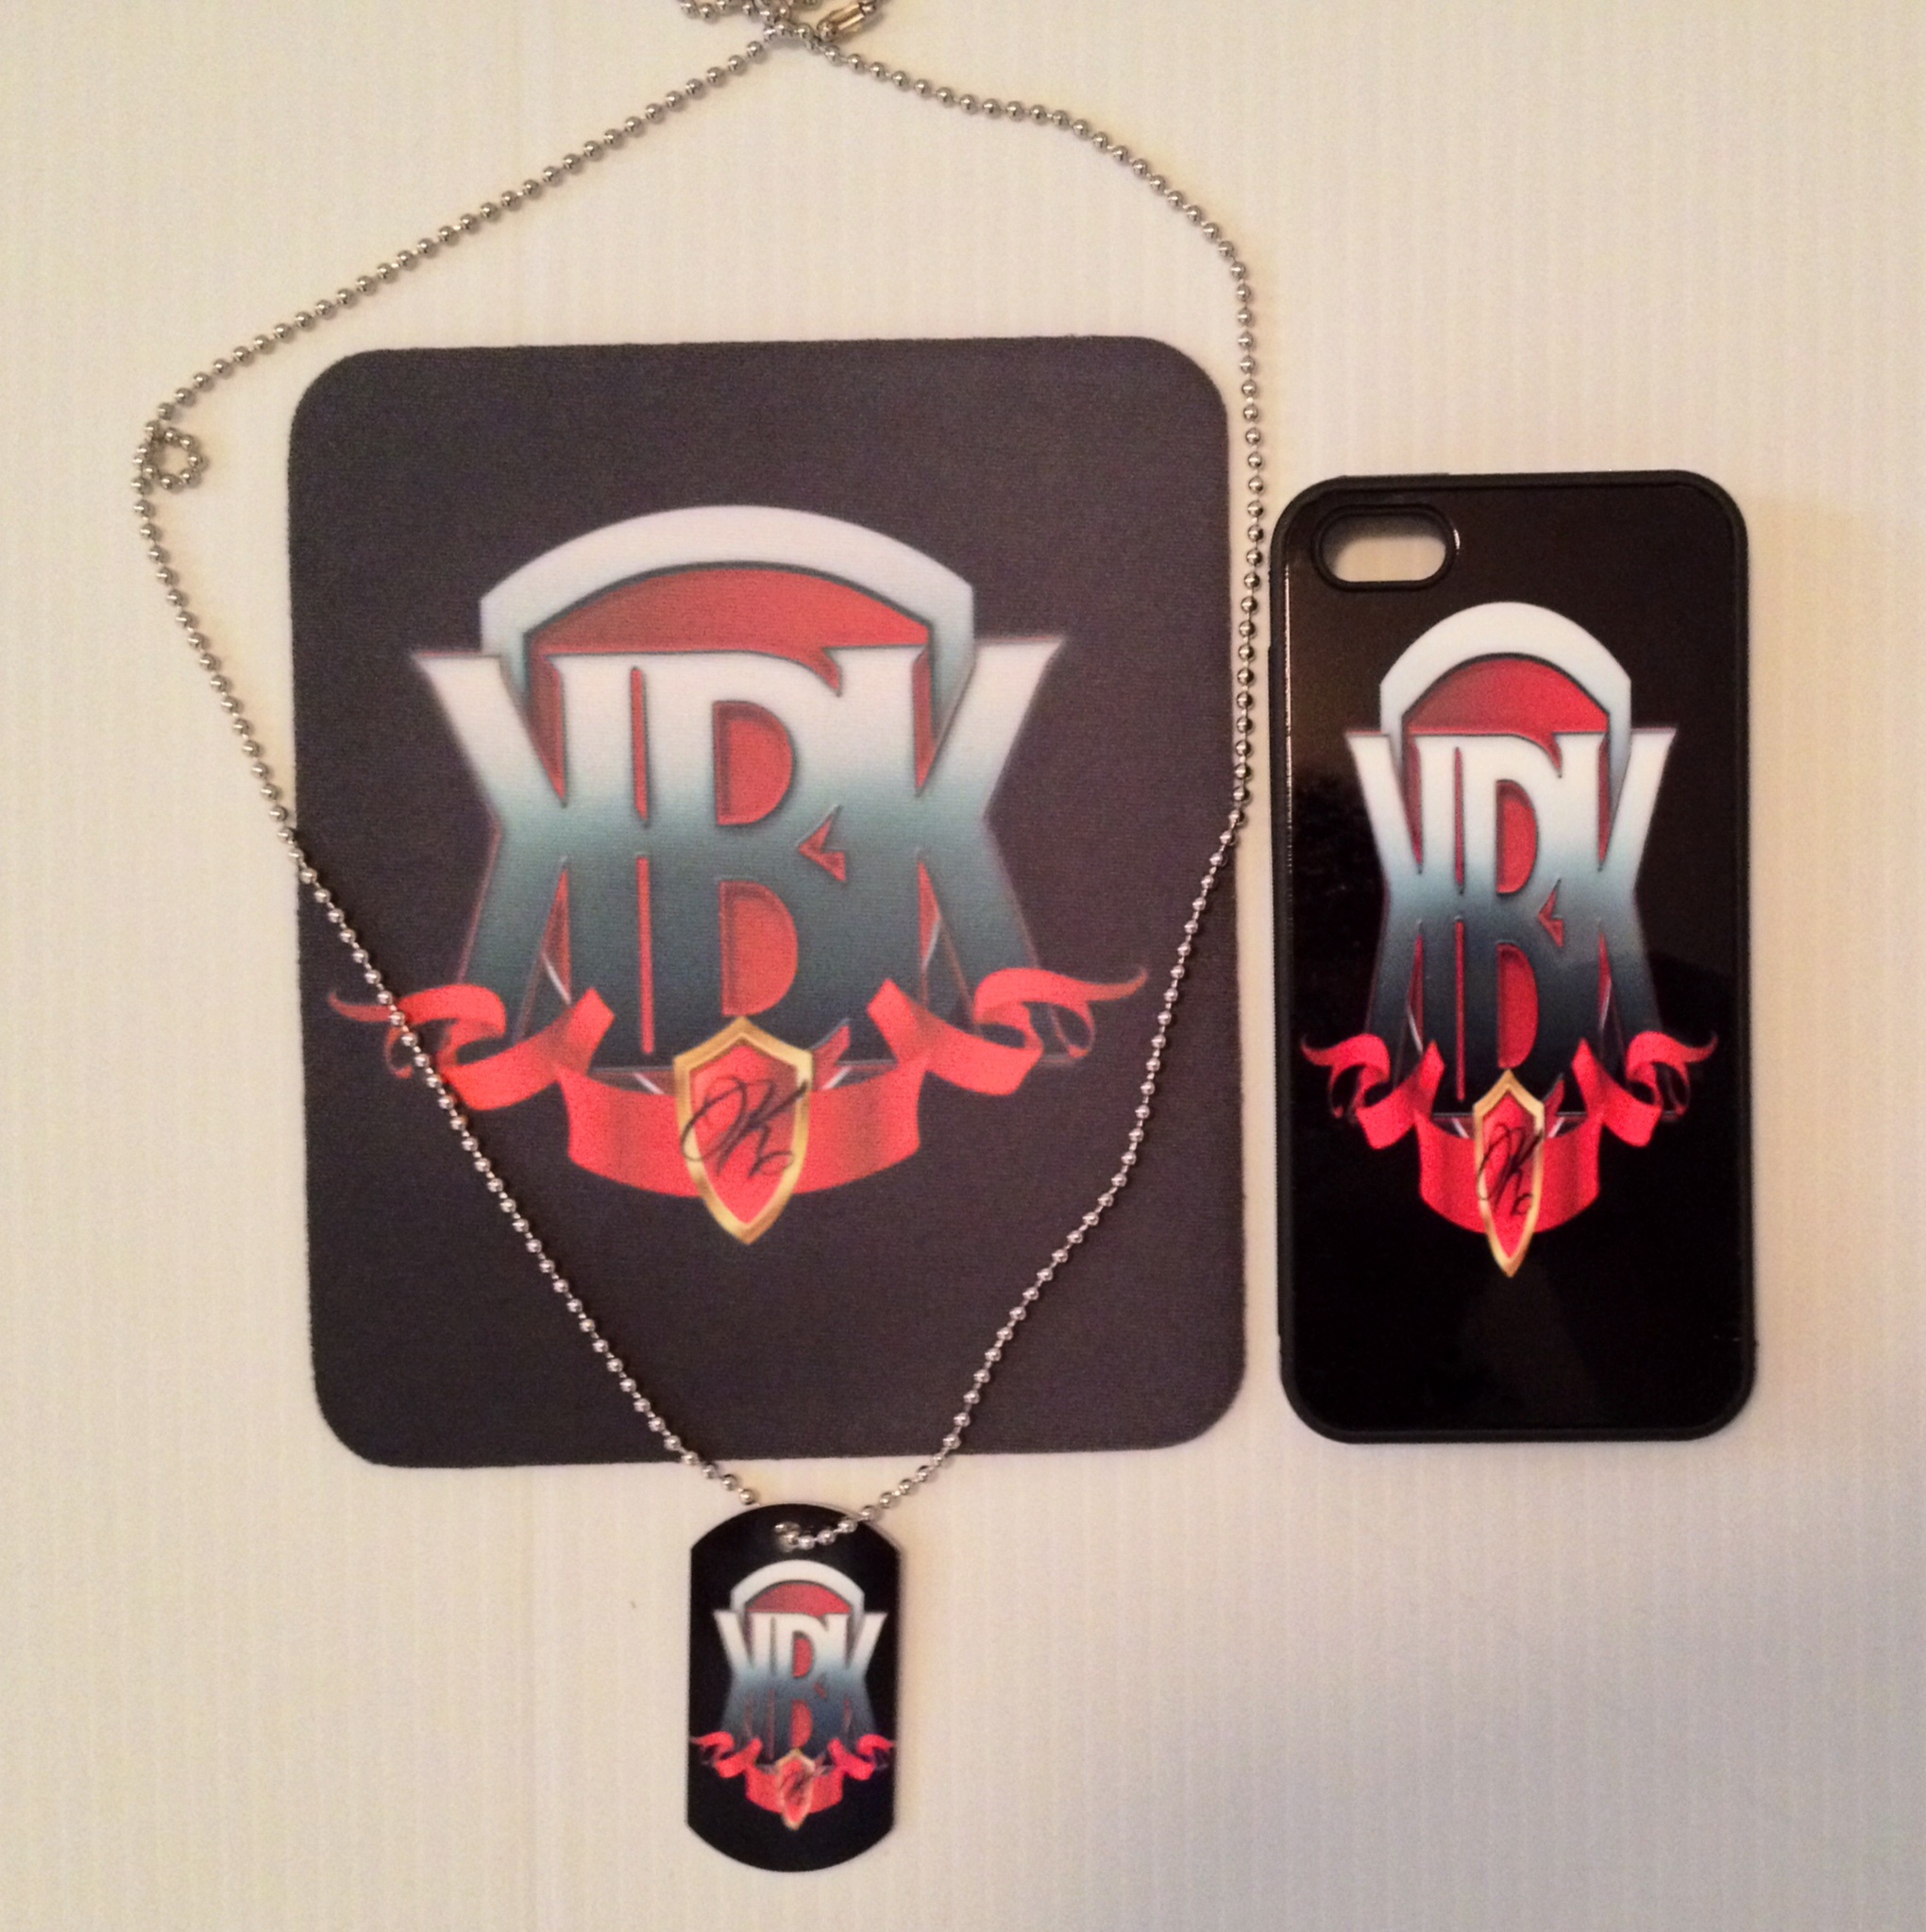 Mousepad , Dogtag, iPhone 4 case made with sublimation printing